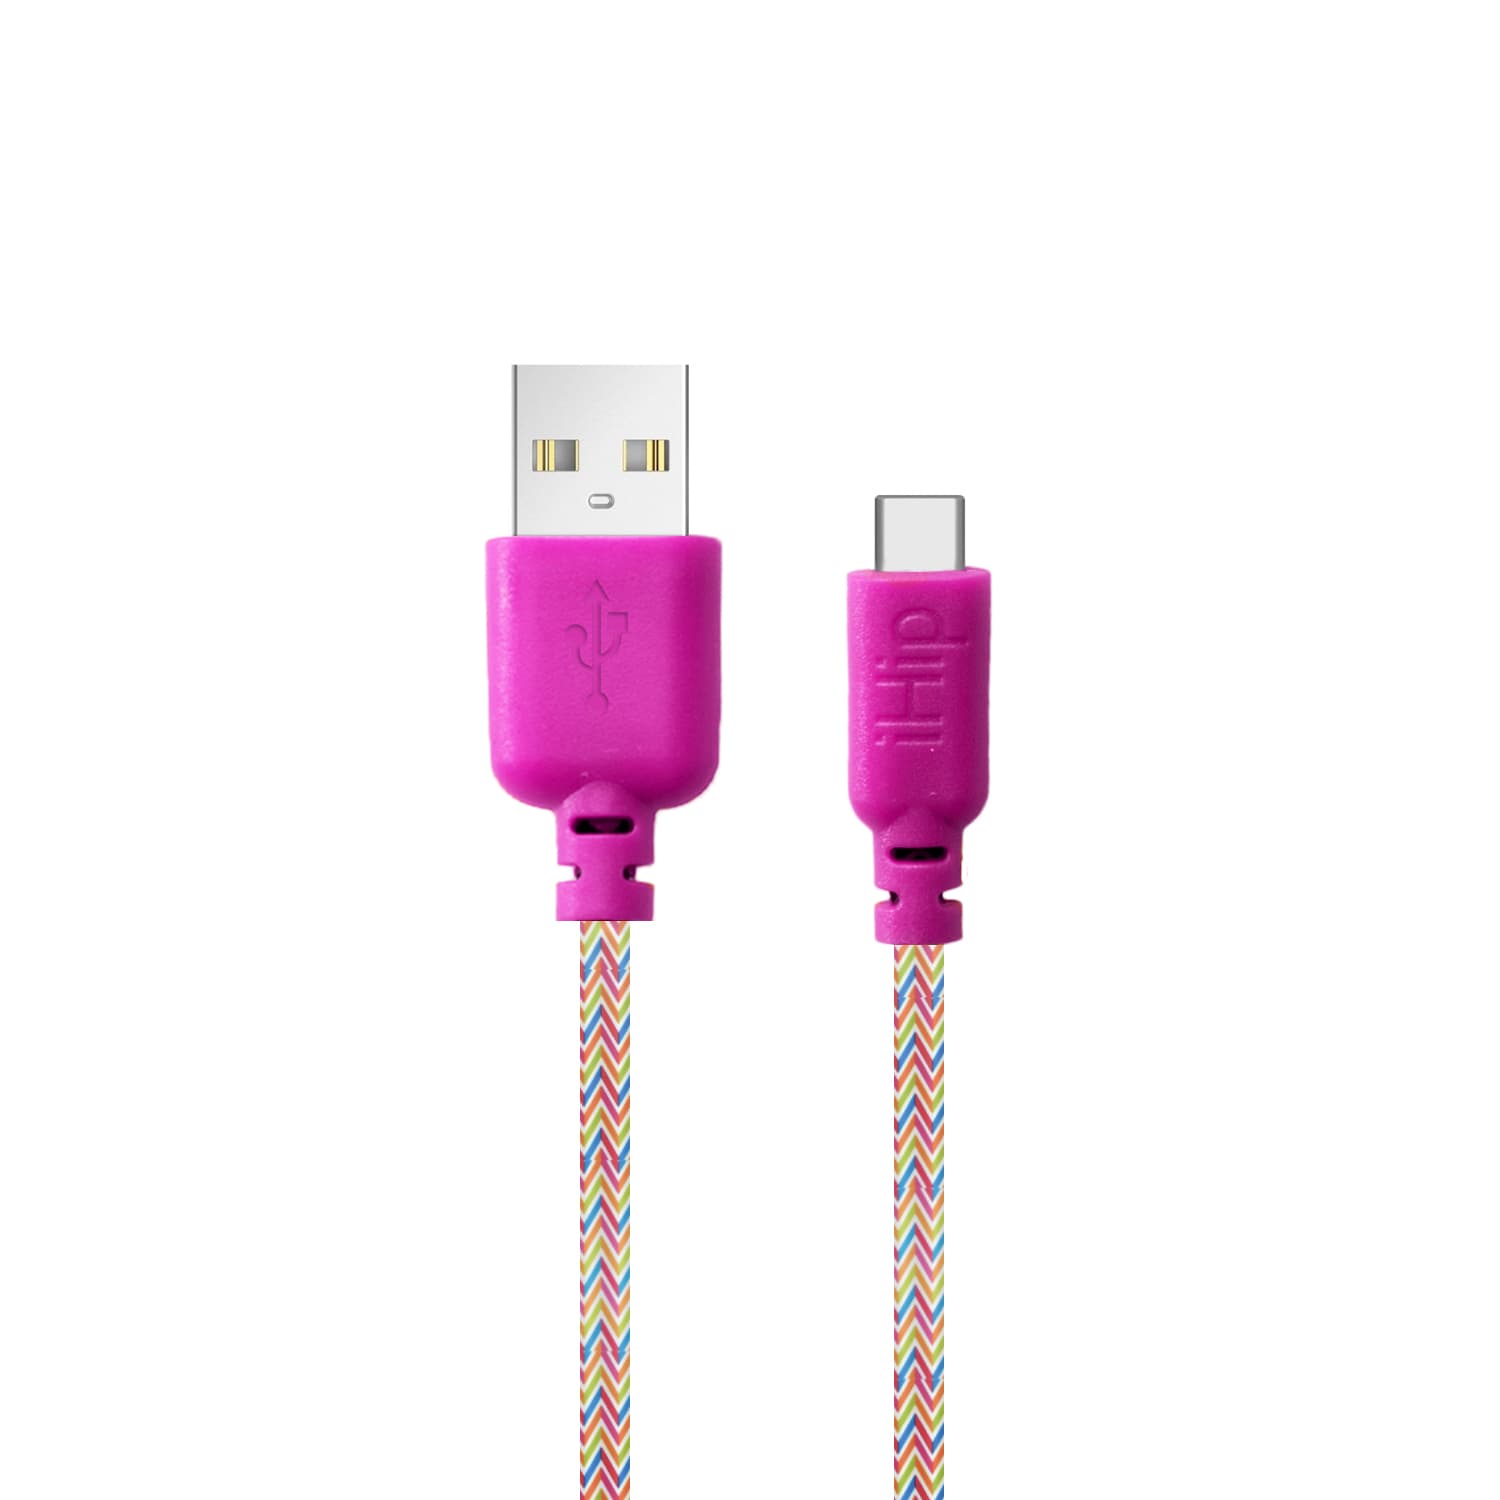 Zeikos iHip Cute Cords Rainbow Braided Type-C USB Sync Fiber Bend Test Certified -Android Charger Cable for Android Samsung Galaxy S9 S10 S8 Plus Note10 9 8, Moto Z,